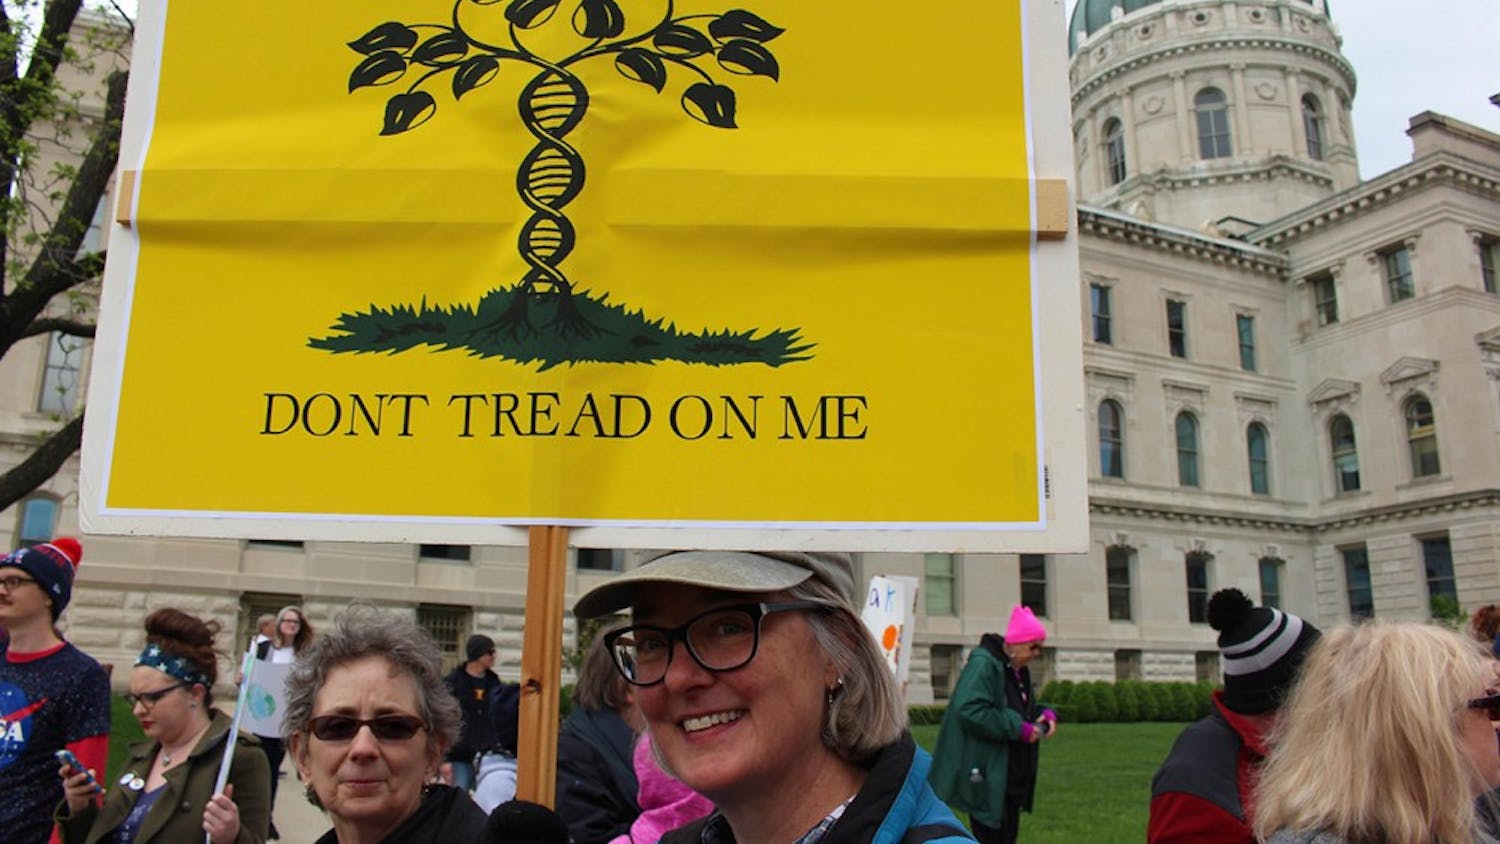 Tami Coleman, 54, came to join an estimated 10,000 people at the March for Science in Indianapolis from her hometown, Anderson, Indiana. Coleman said she’s a New Englander, and is sick of pepole co-opting New England symbols, like the Gasden flag, to further their causes. 